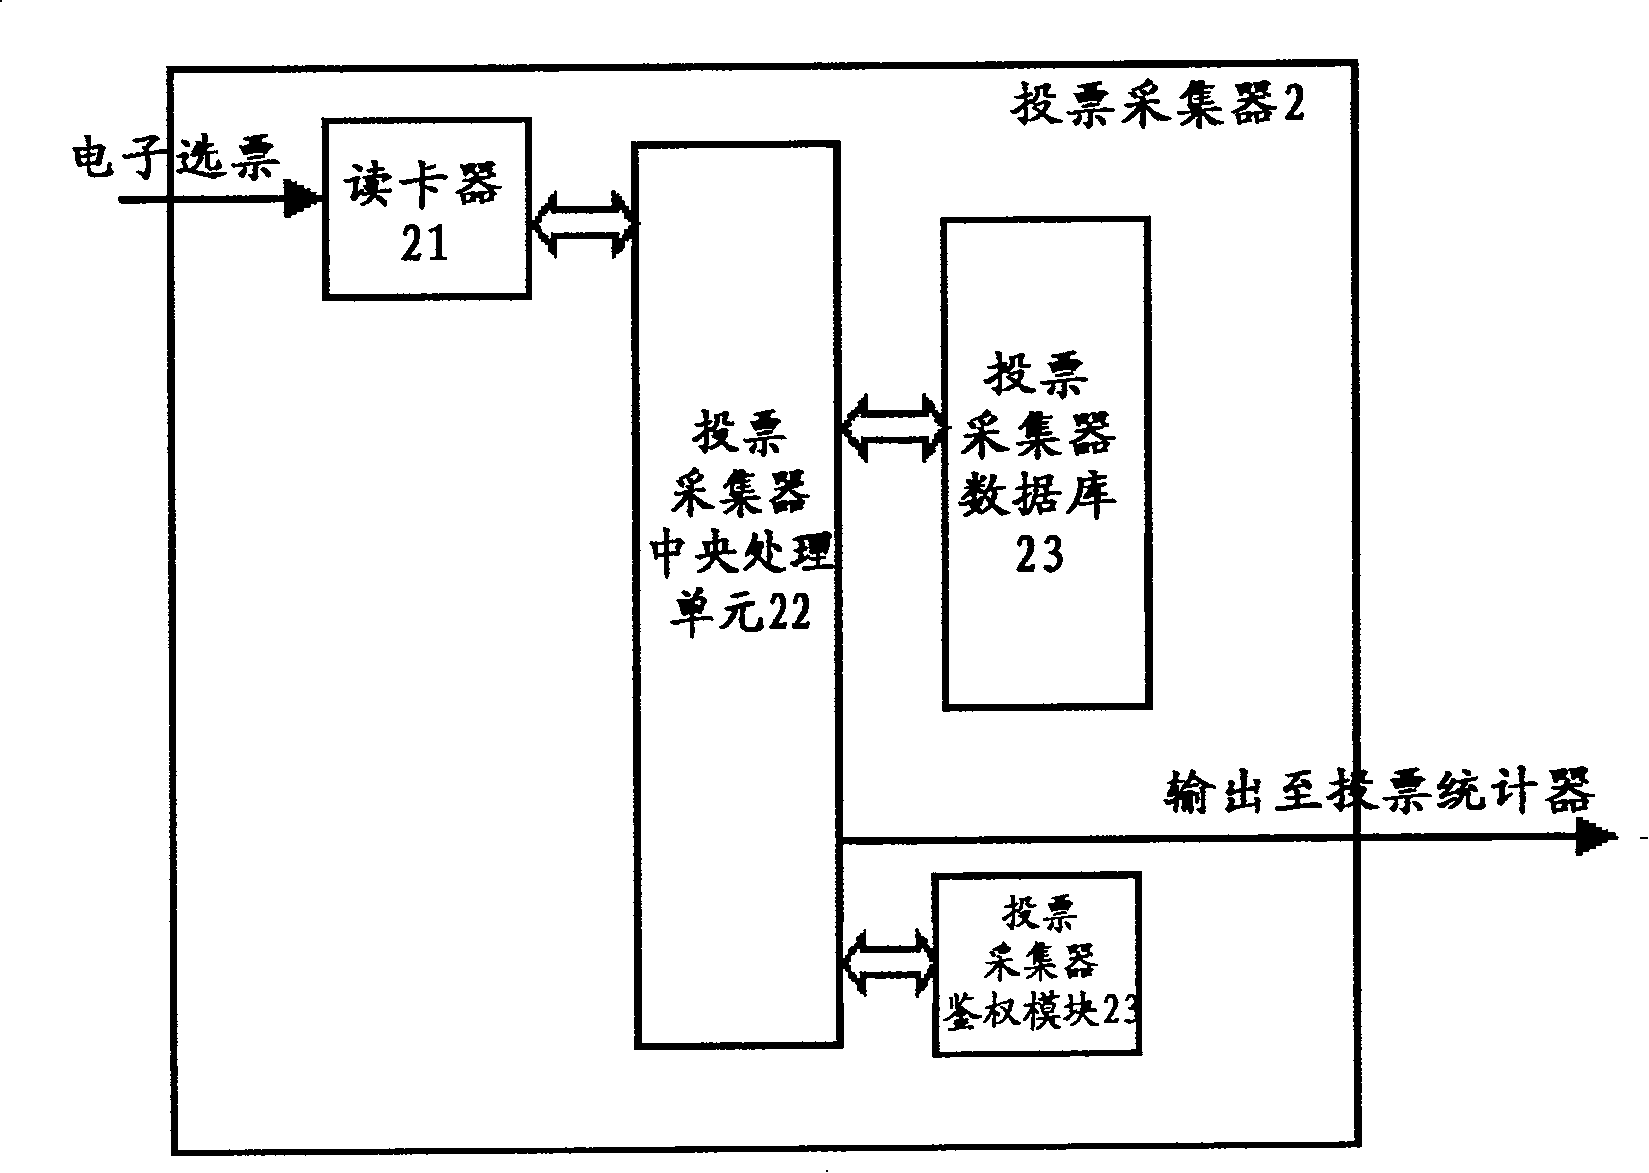 Electronic voting system and method